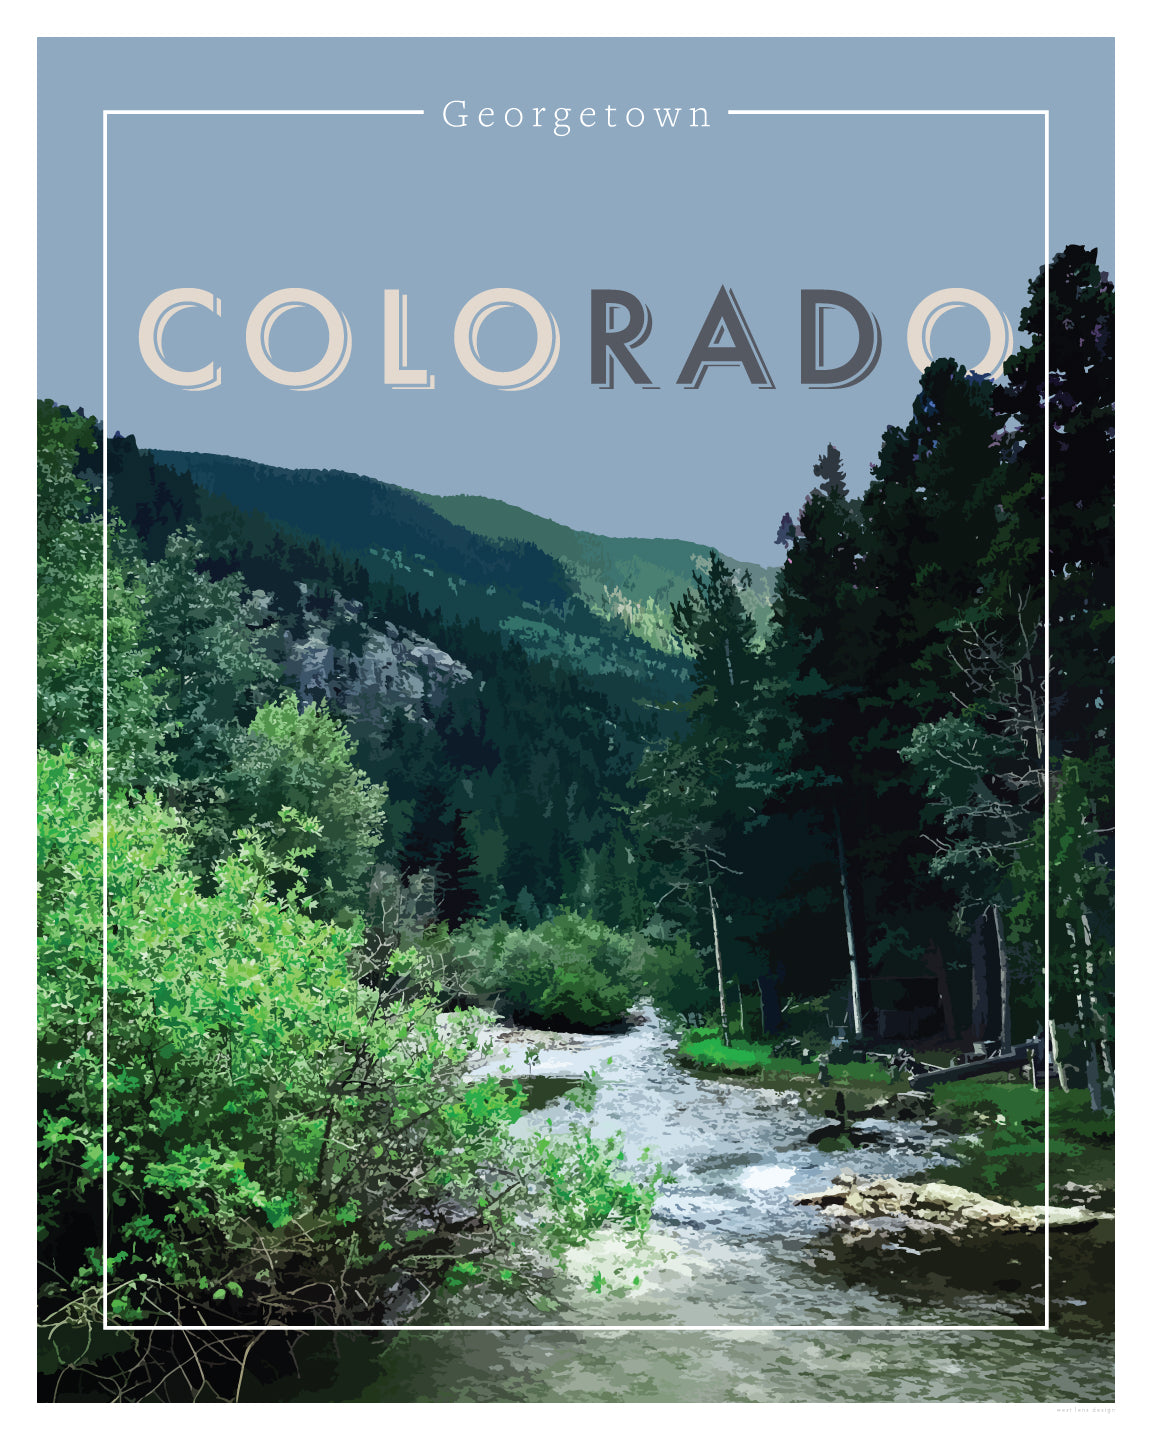 coloRADo - Georgetown, Wall Art, Print Only (No Frame)